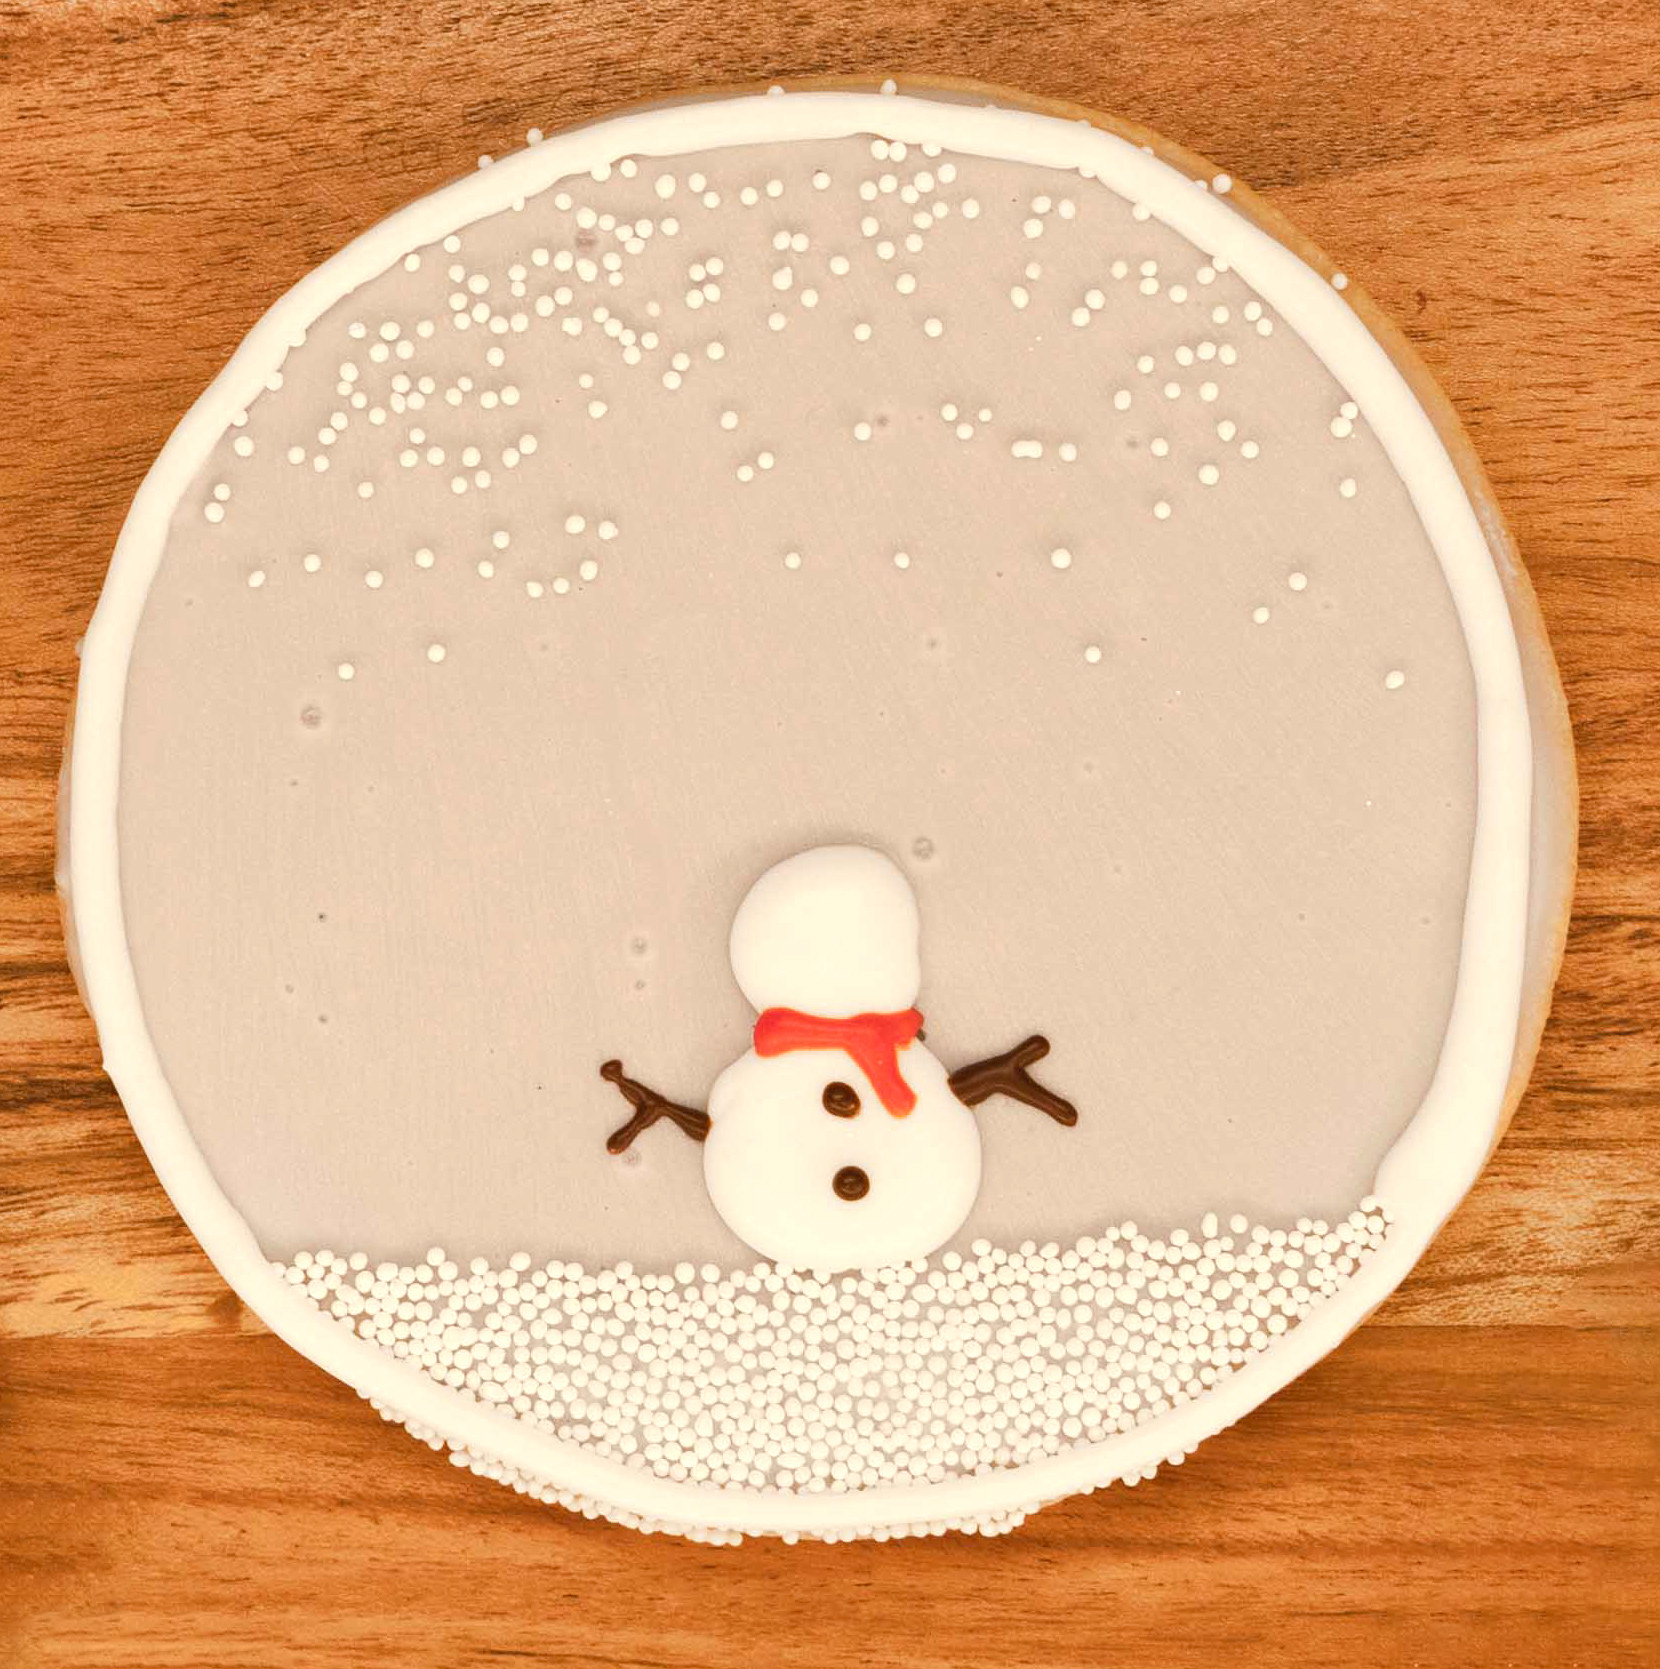 Snowman in the snow globe cookie